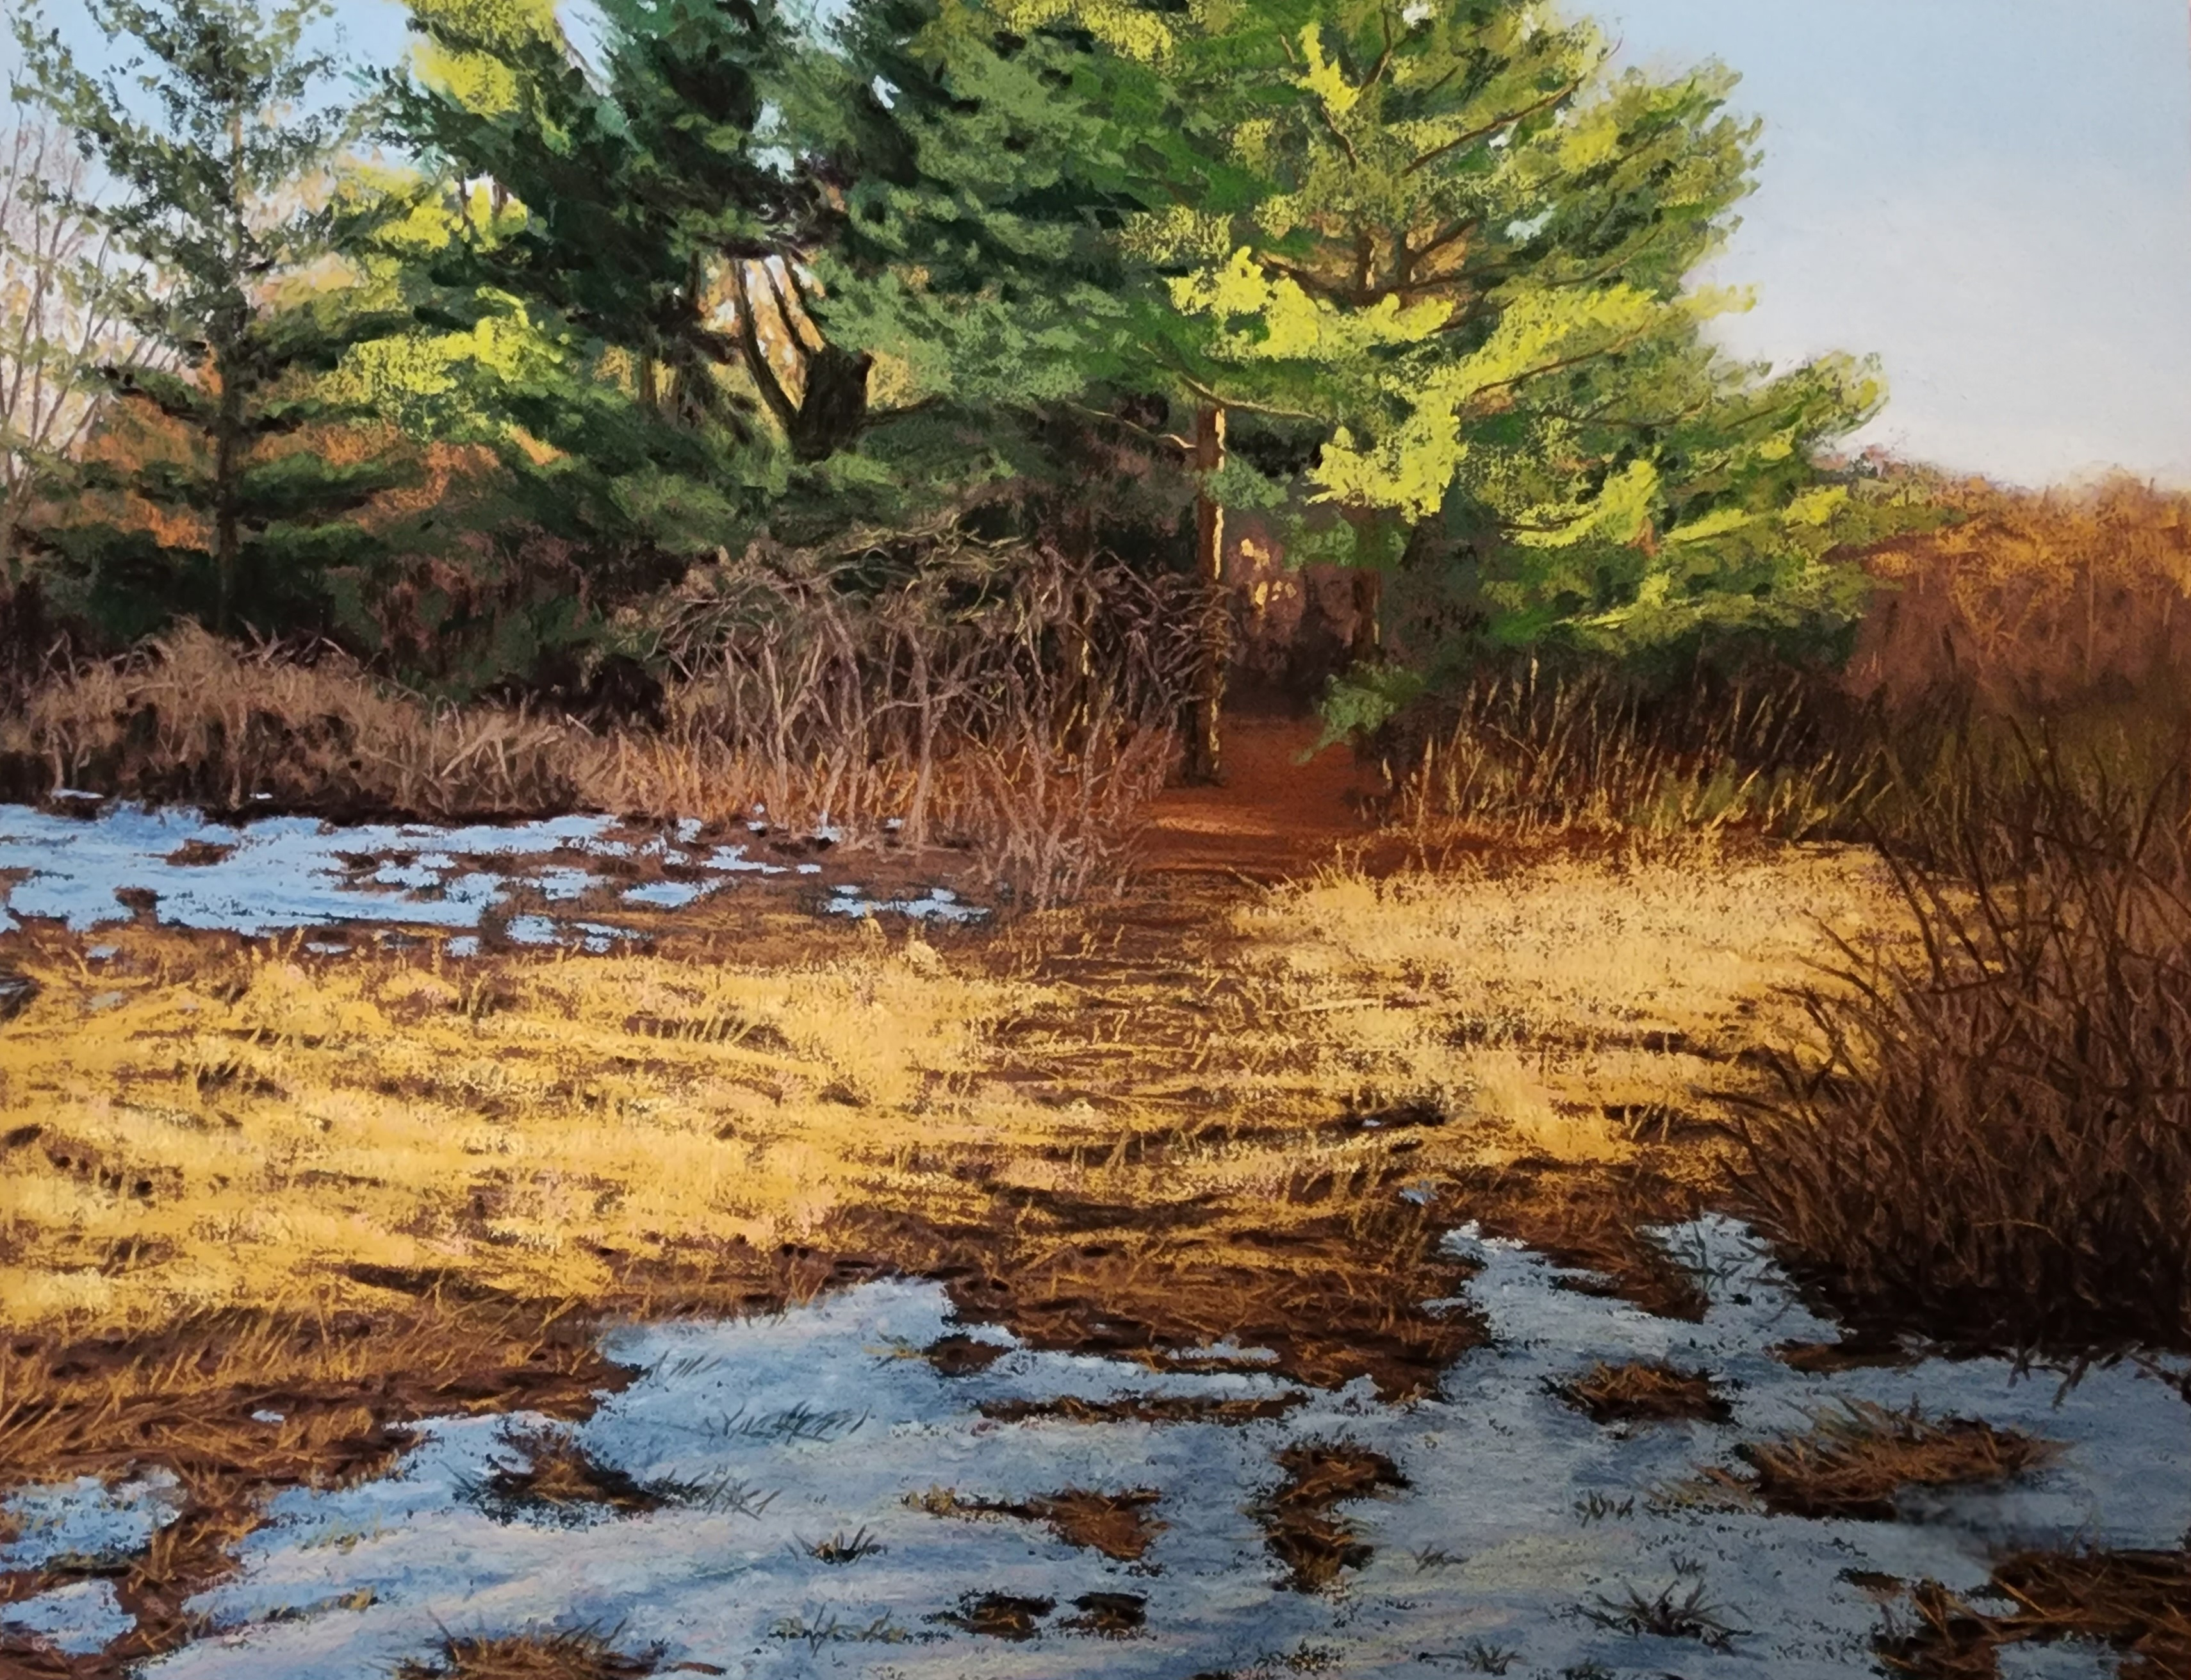 Drawing of field with some snow and brown and tan grasses with coniferous trees and sunny sky in background